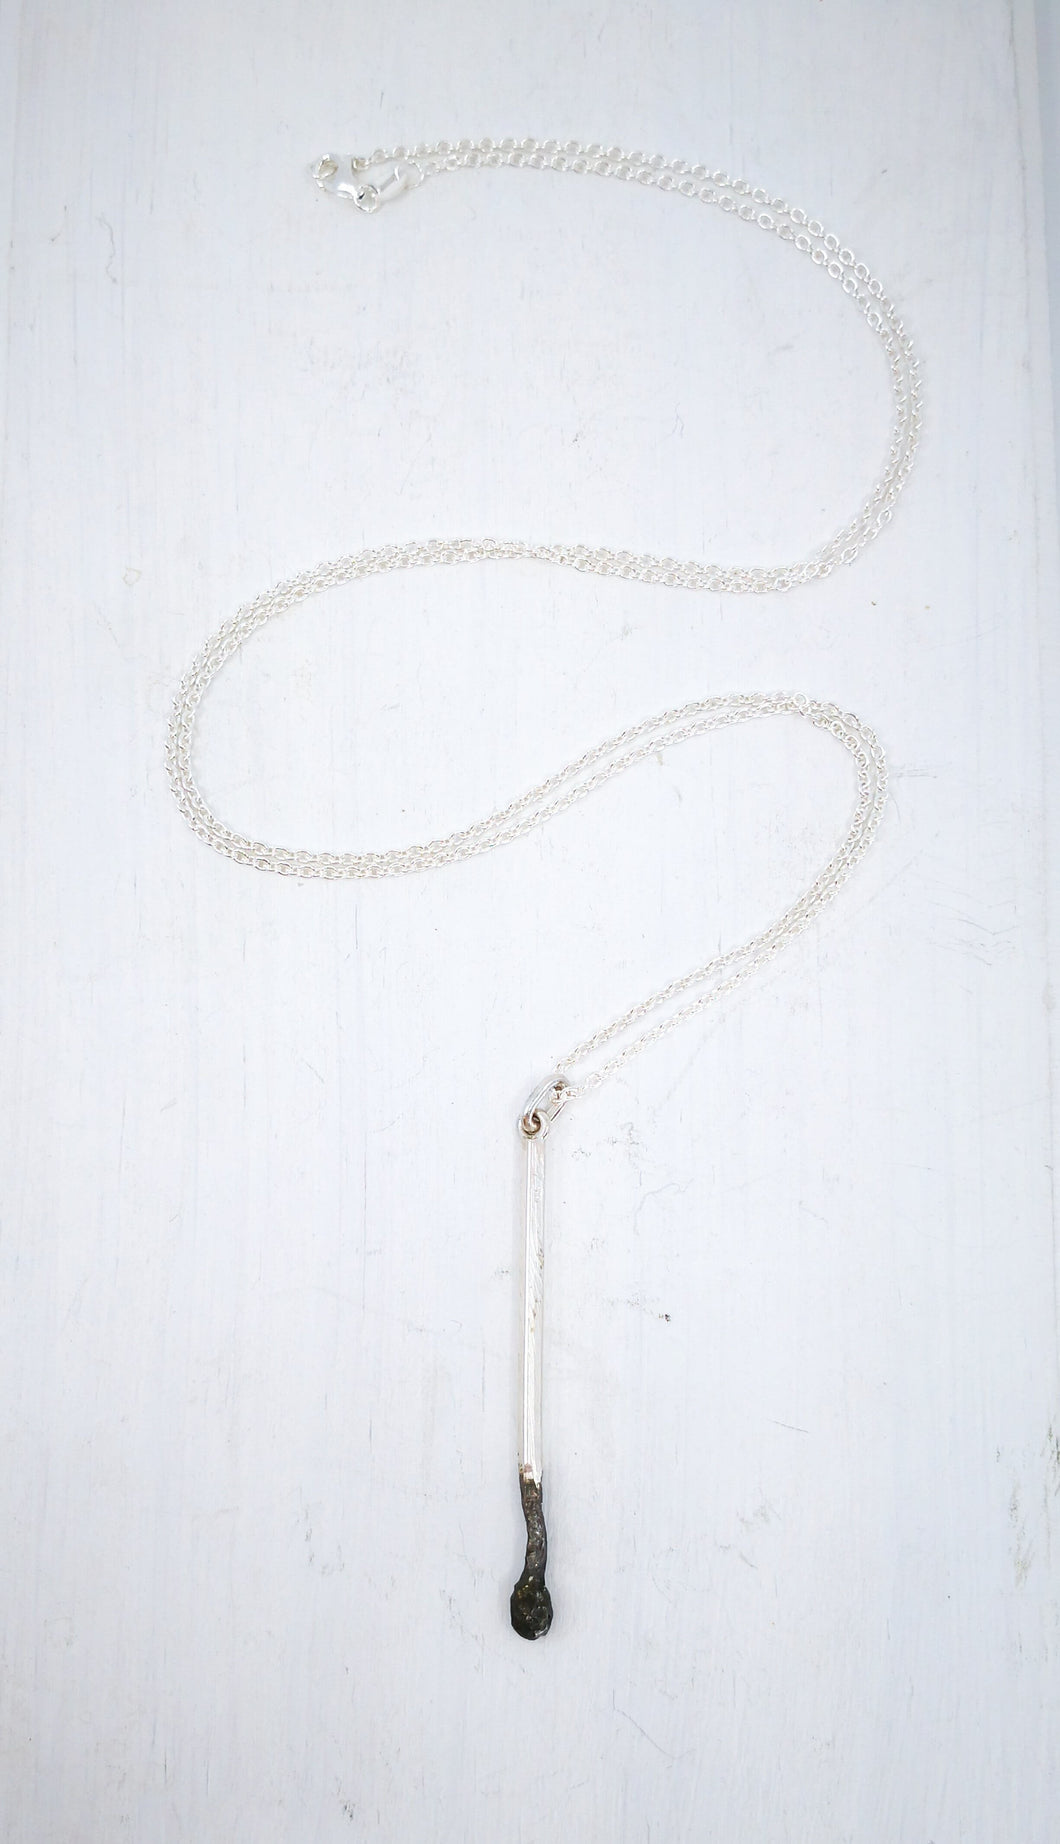 The Burnt Match pendant hand crafted by David McLeod, an icon in NZ jewellery.